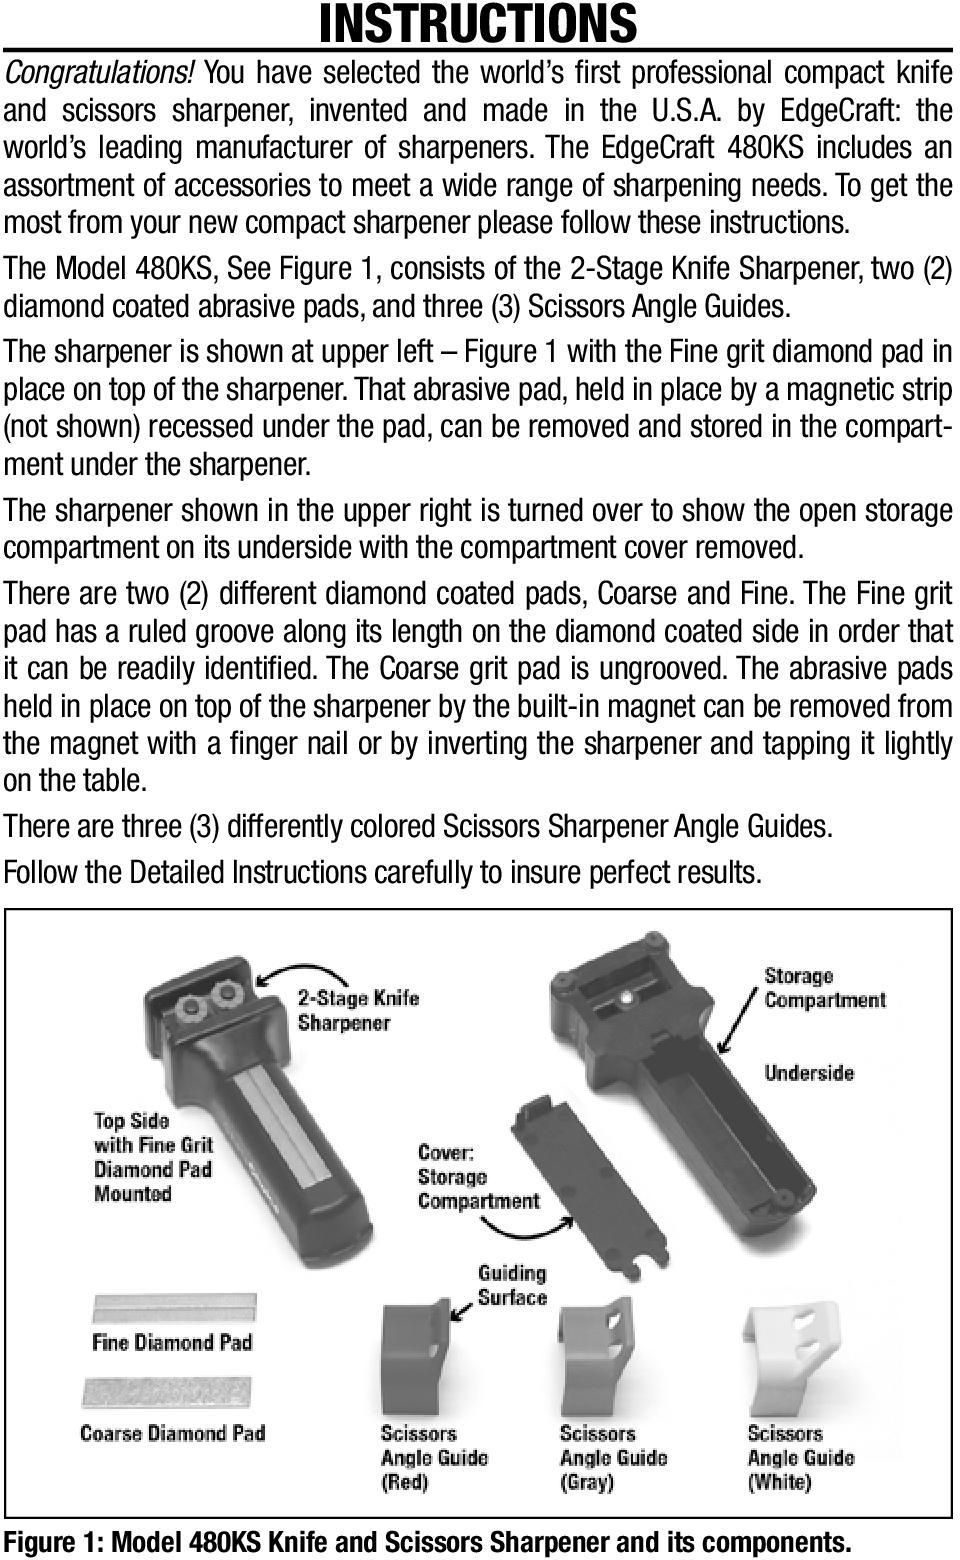 To get the most from your new compact sharpener please follow these instructions.